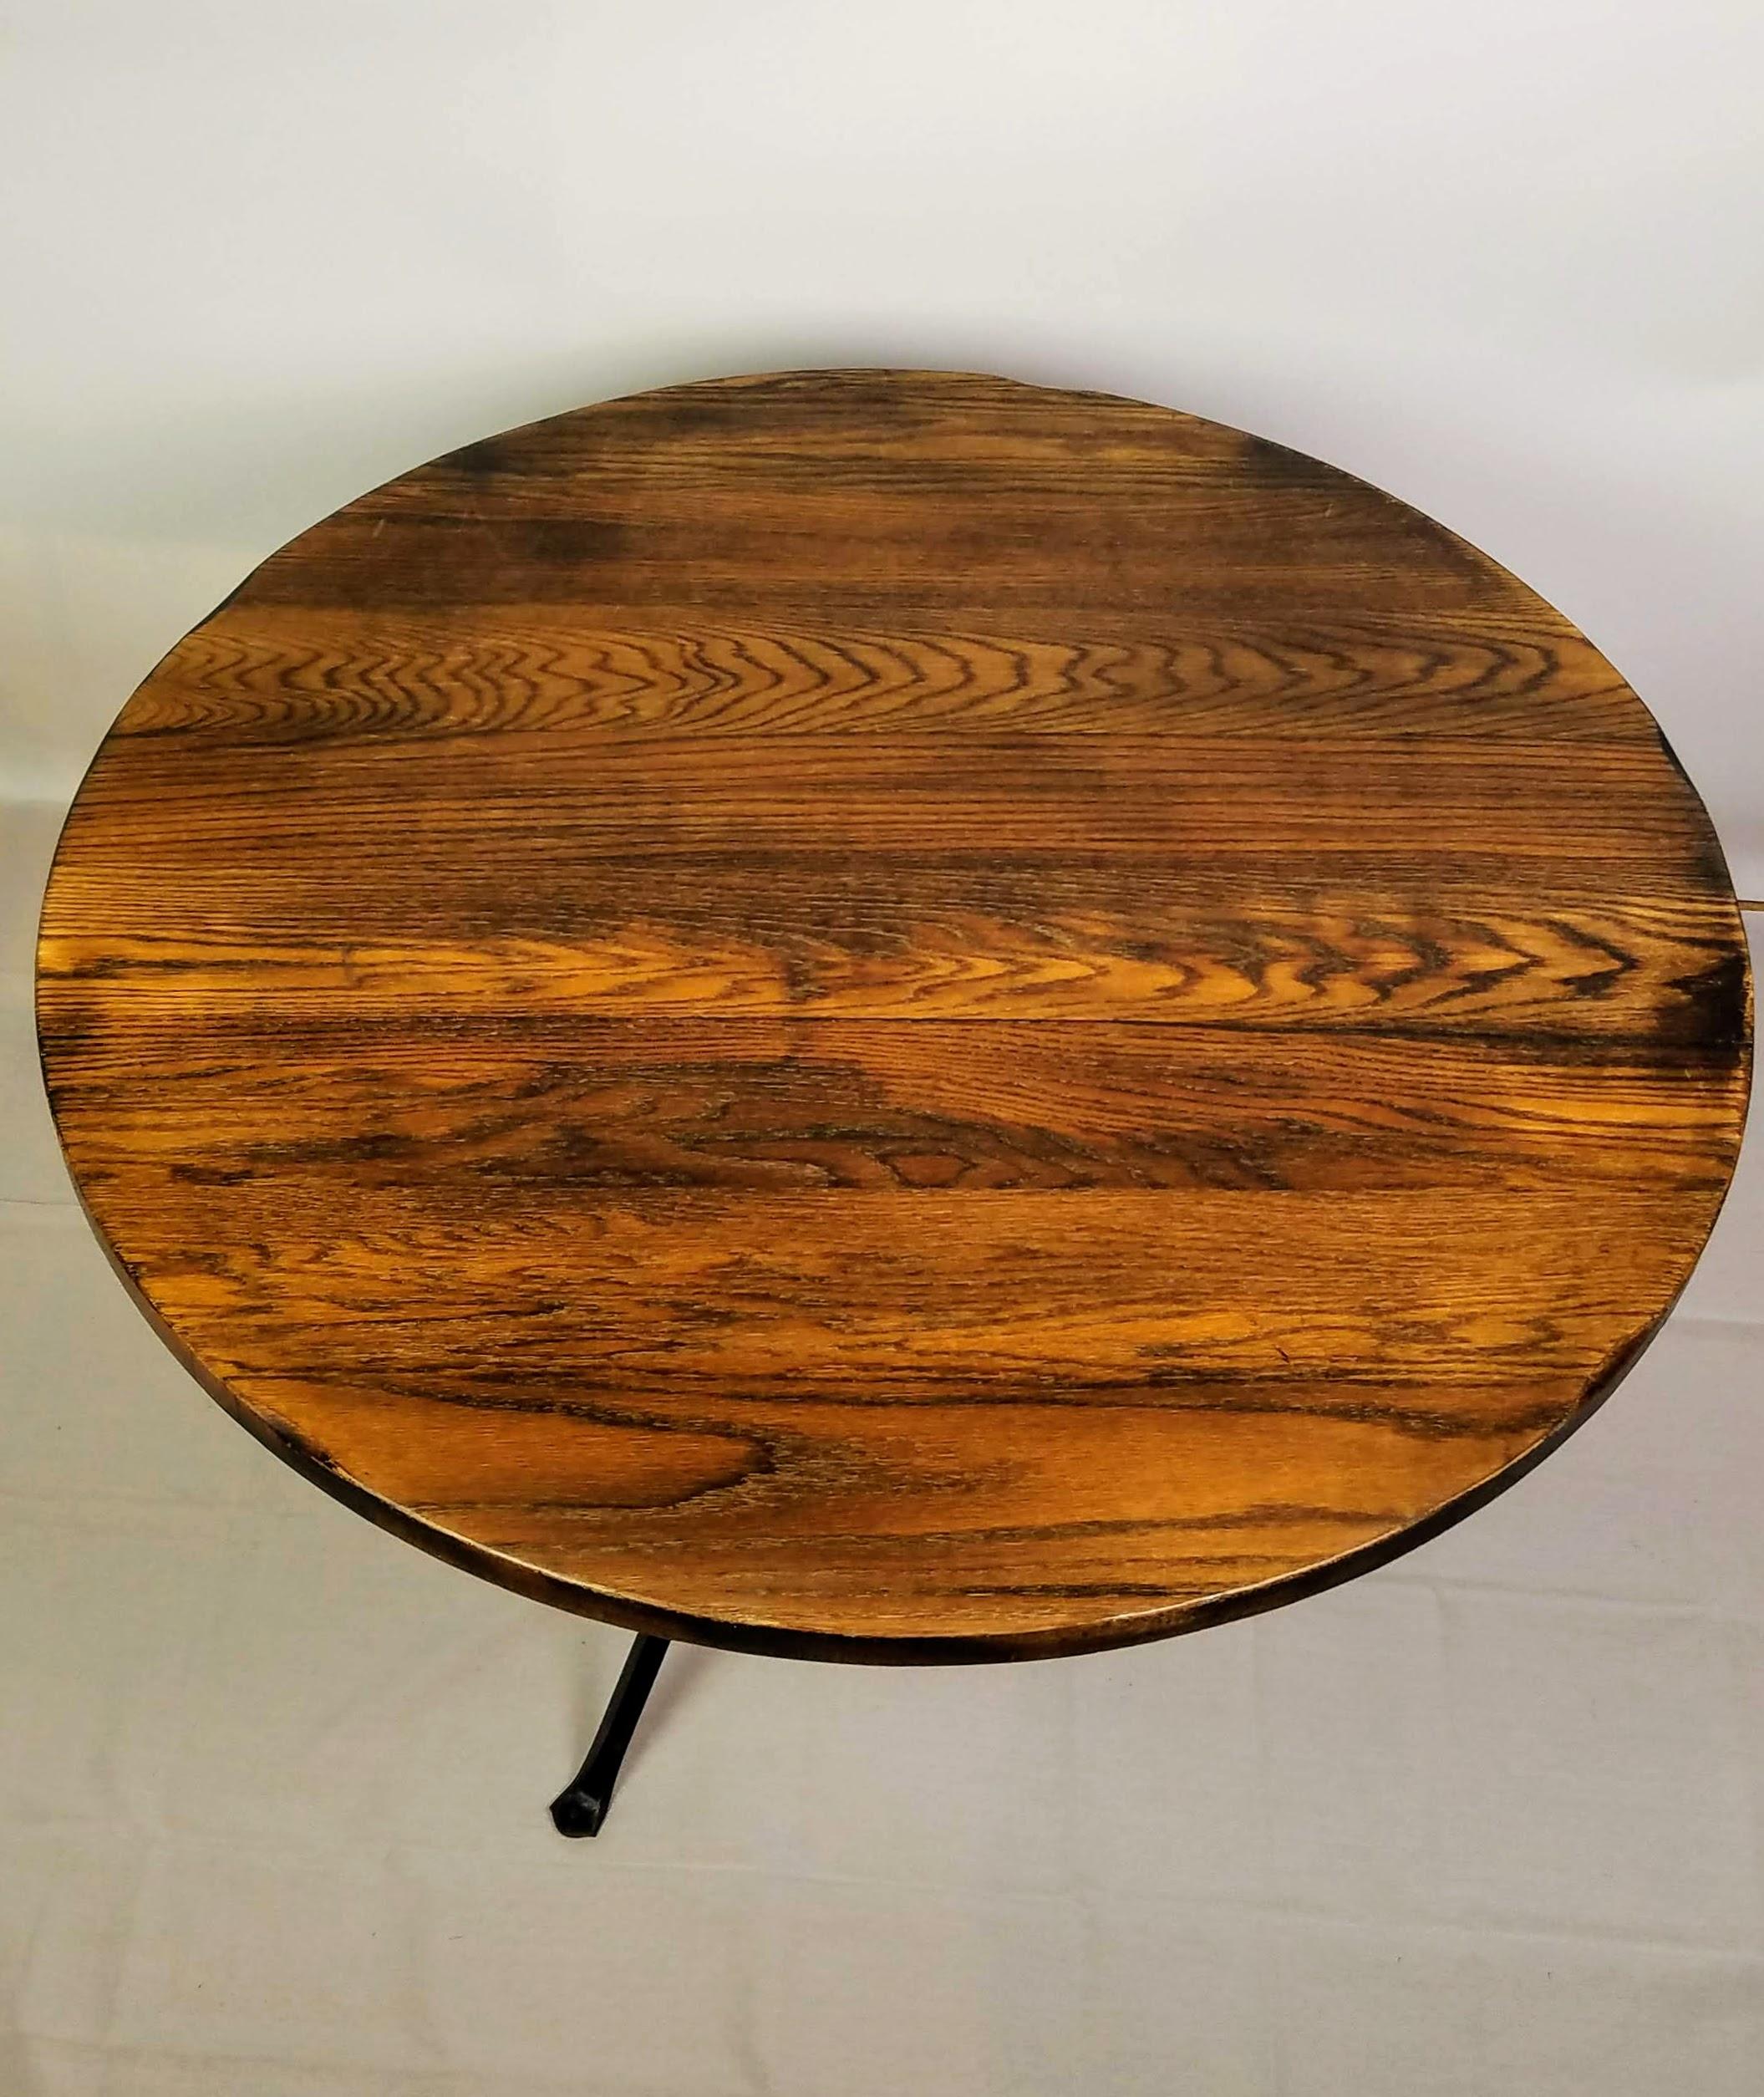 Cleo Baldon Wrought Iron Round Smoked Oak Dining Table El Monte, CA. c. 1968 In Good Condition For Sale In Camden, ME